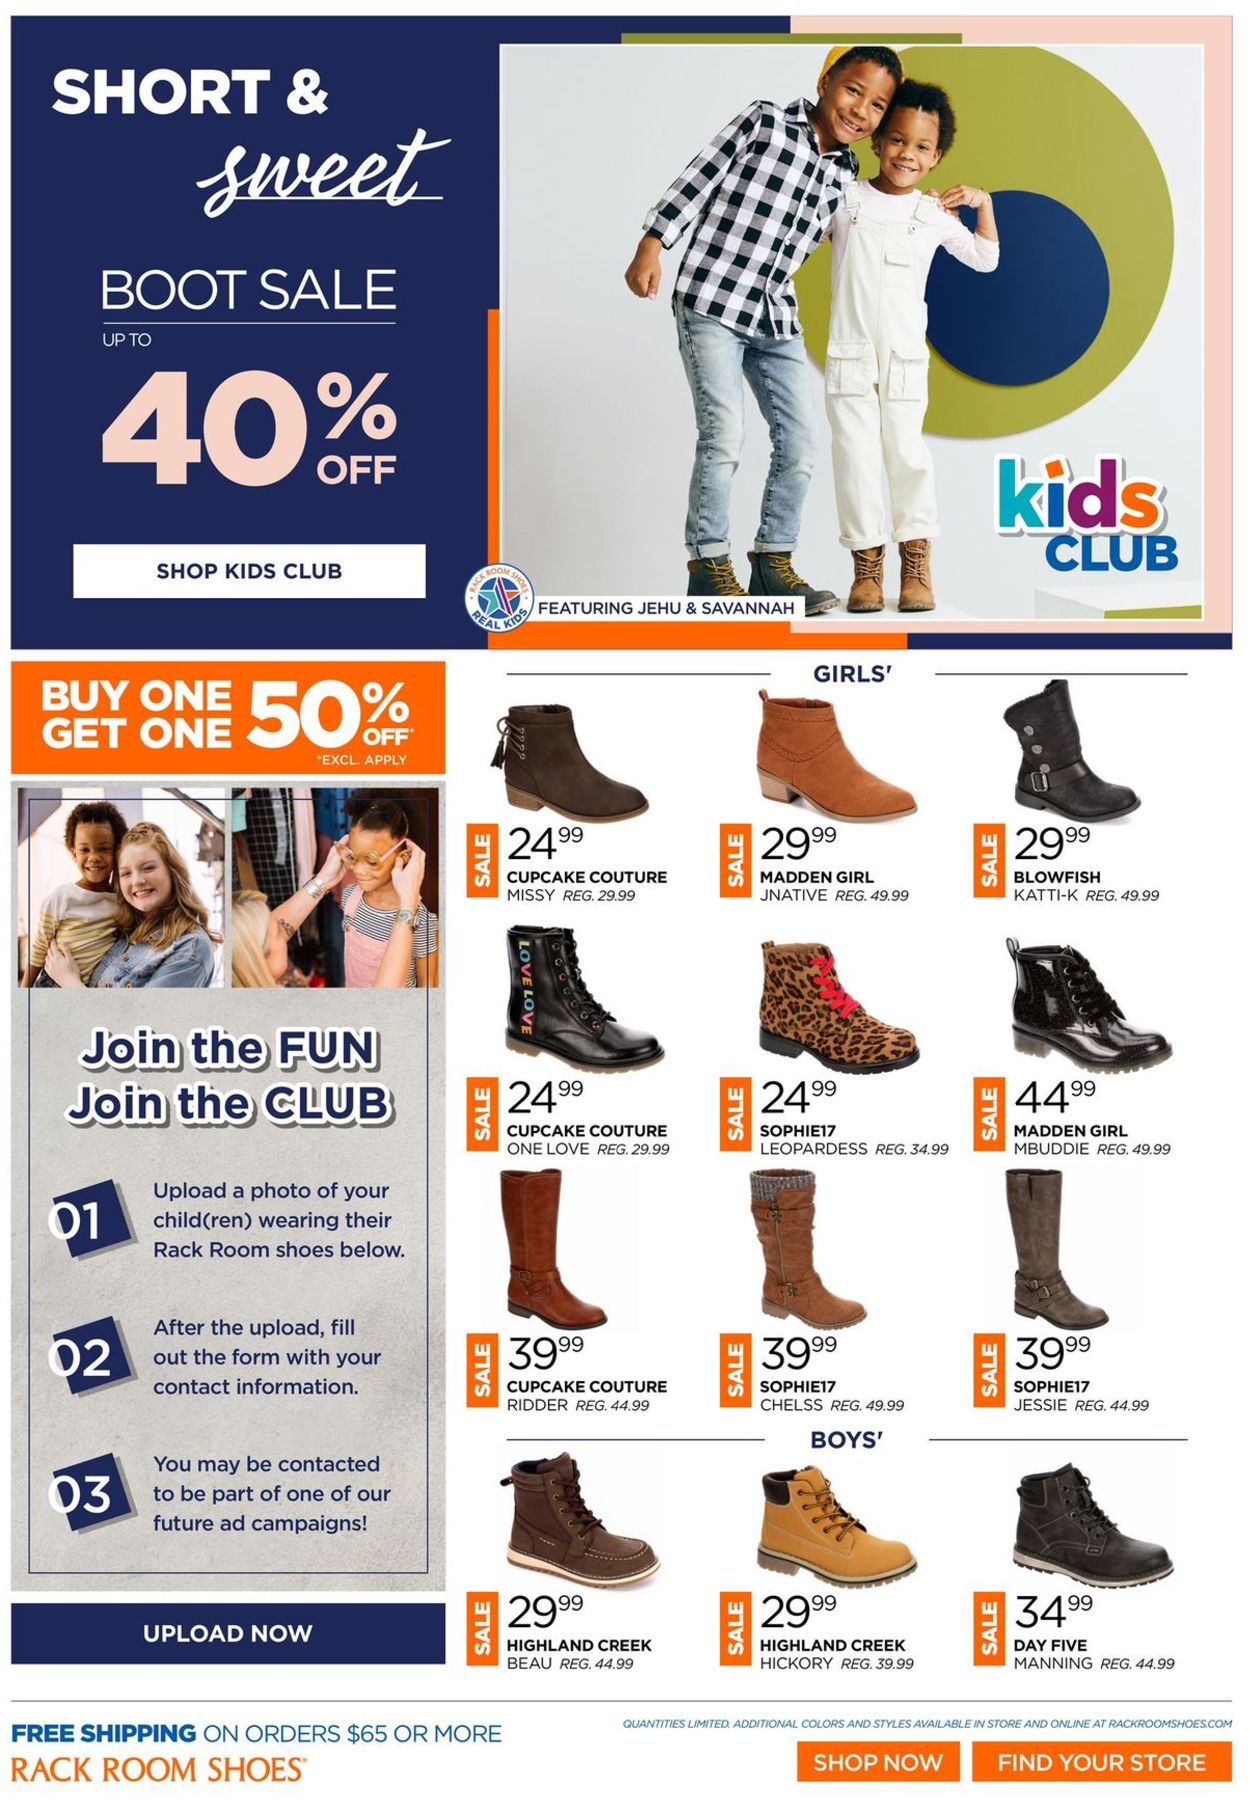 Rack Room Shoes - Black Friday Ad 2019 Current weekly ad 11/01 - 11/19 - What Shops Are Doing Black Friday Deals